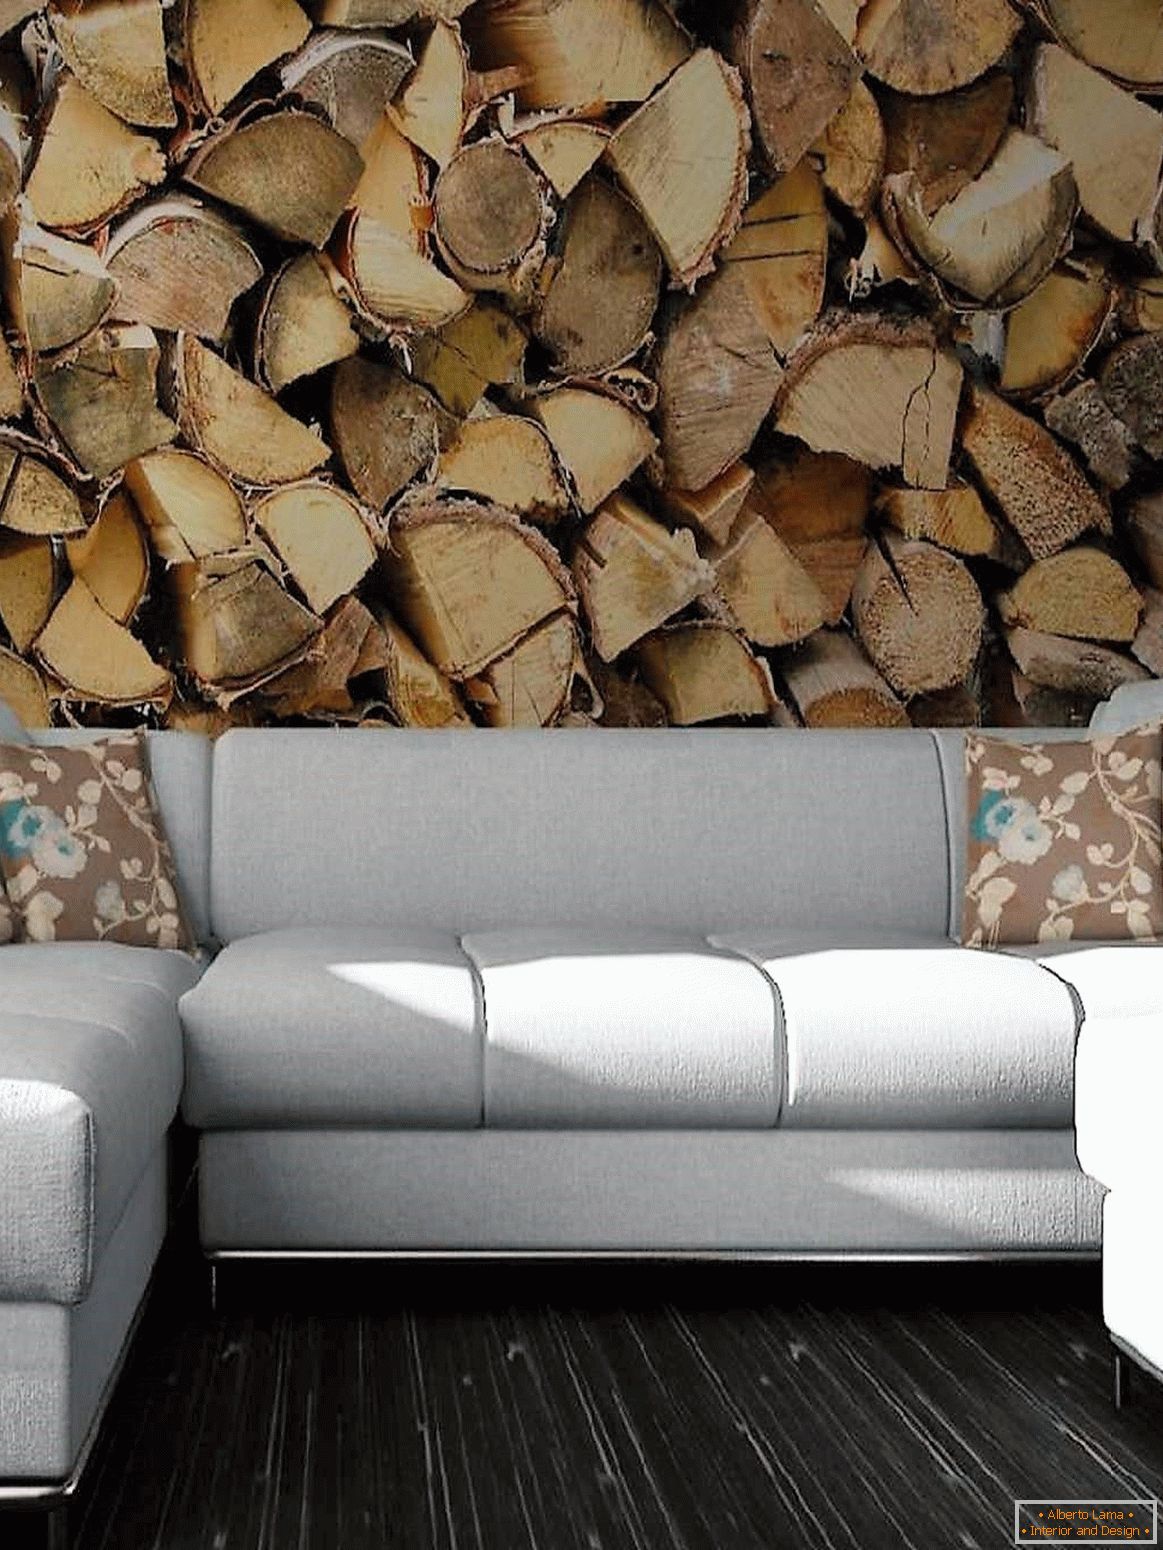 Wall-papers with a picture of logs